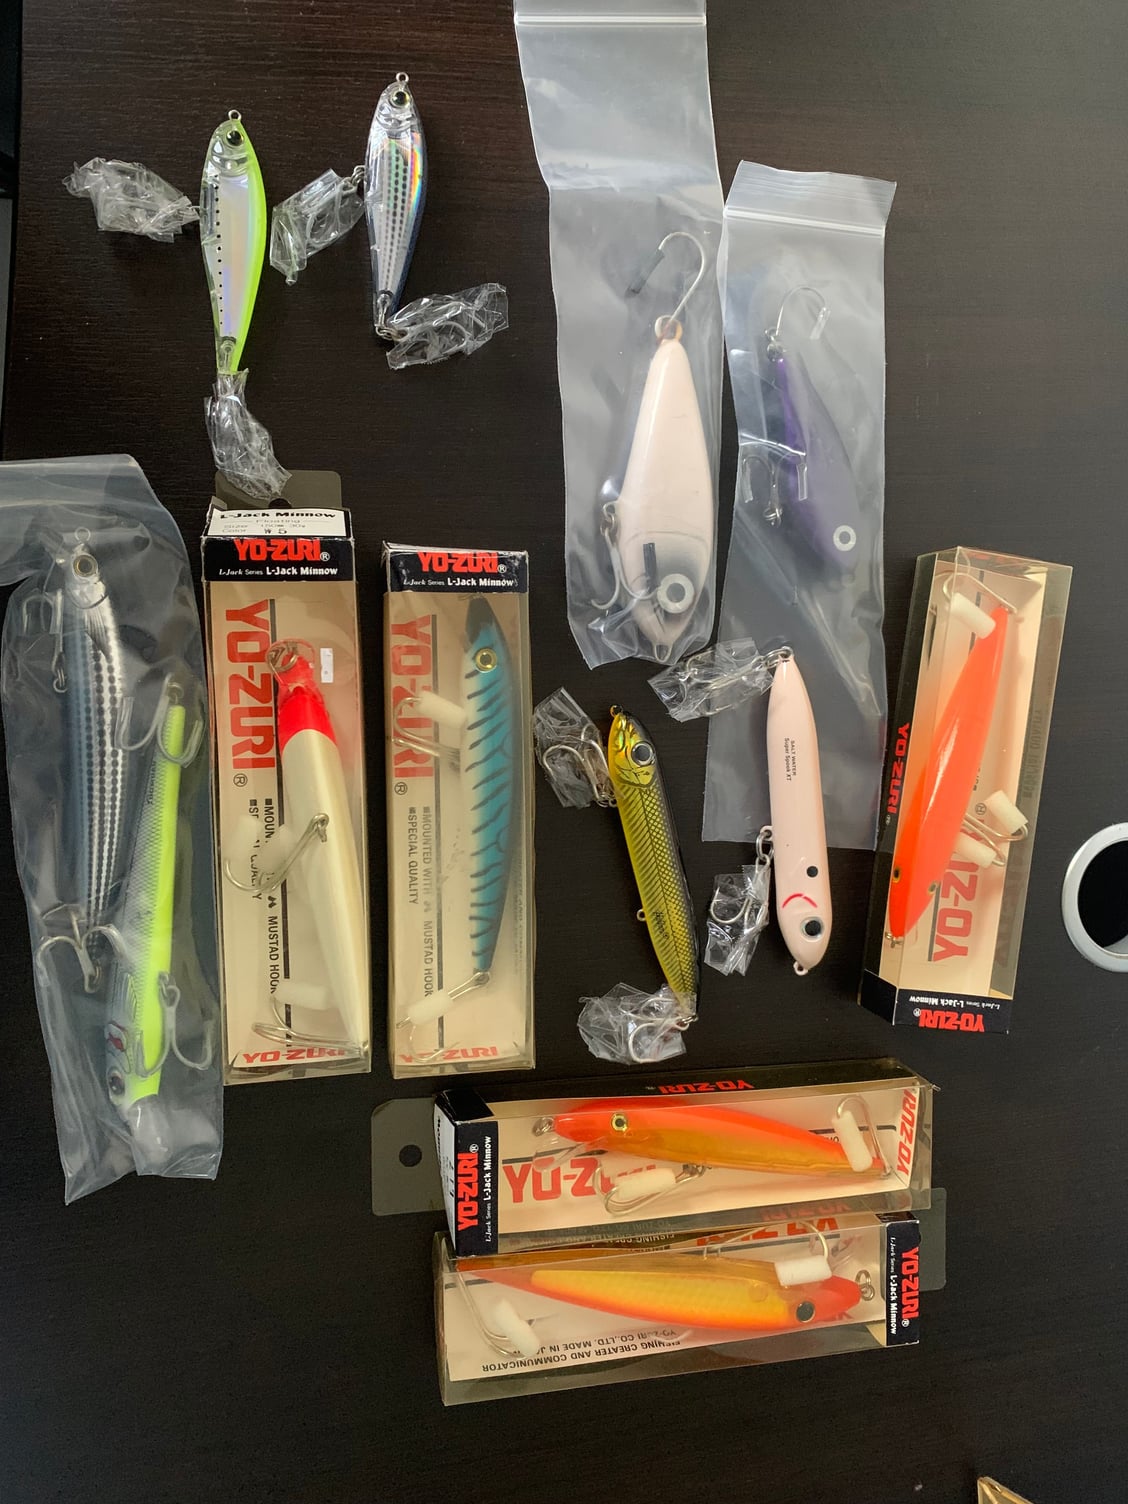 Lure storage bags? - The Hull Truth - Boating and Fishing Forum